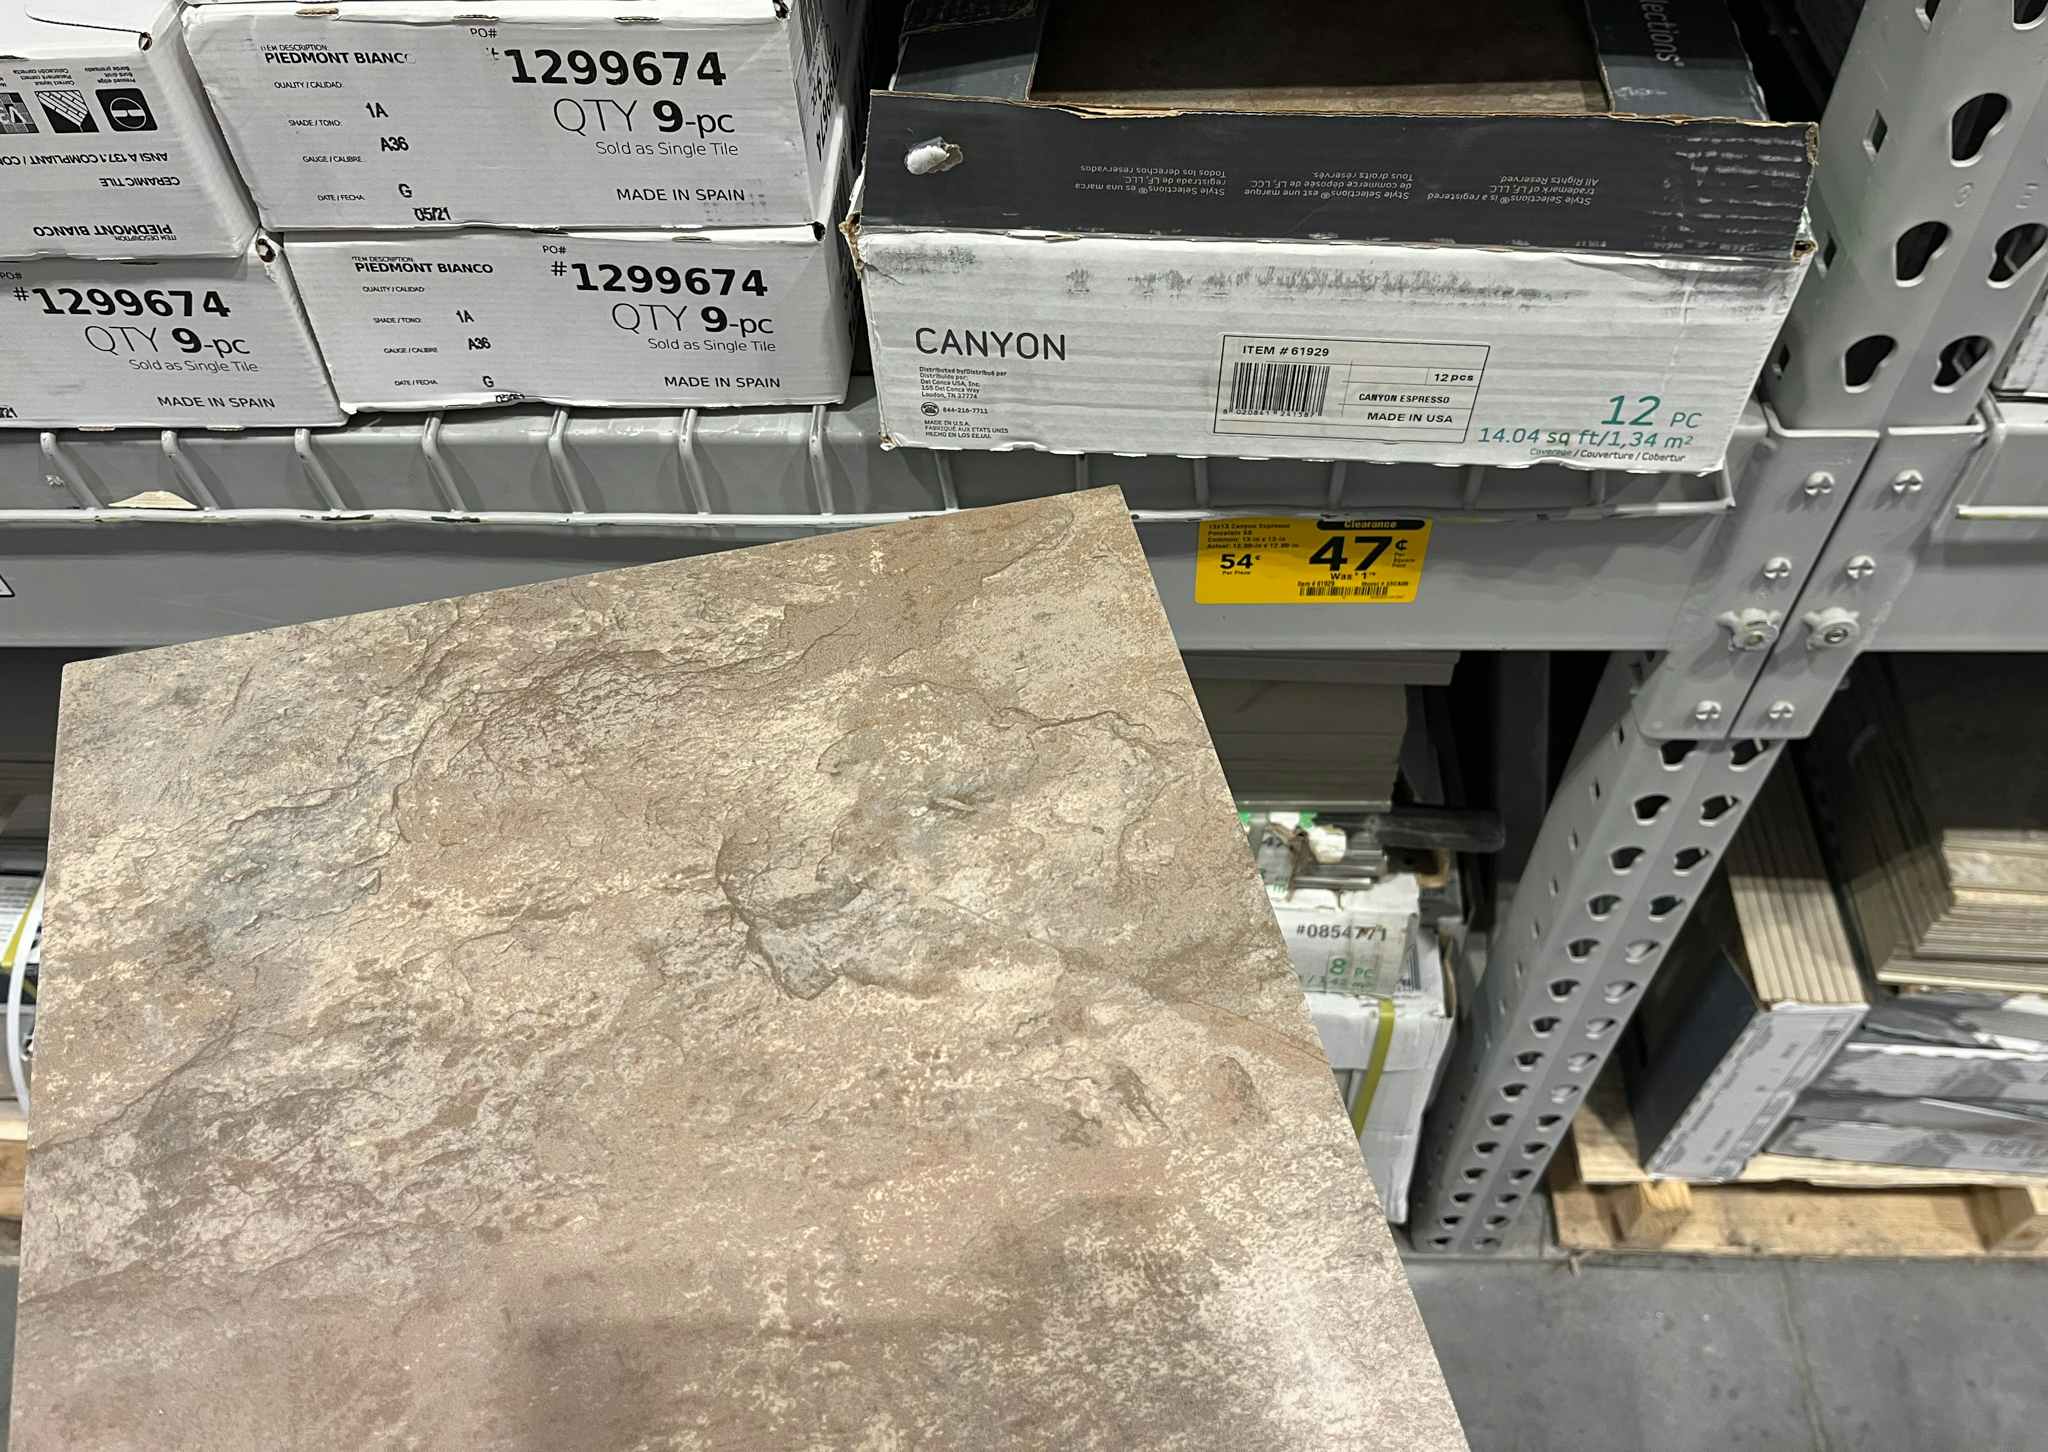 Flooring clearance at Lowe's